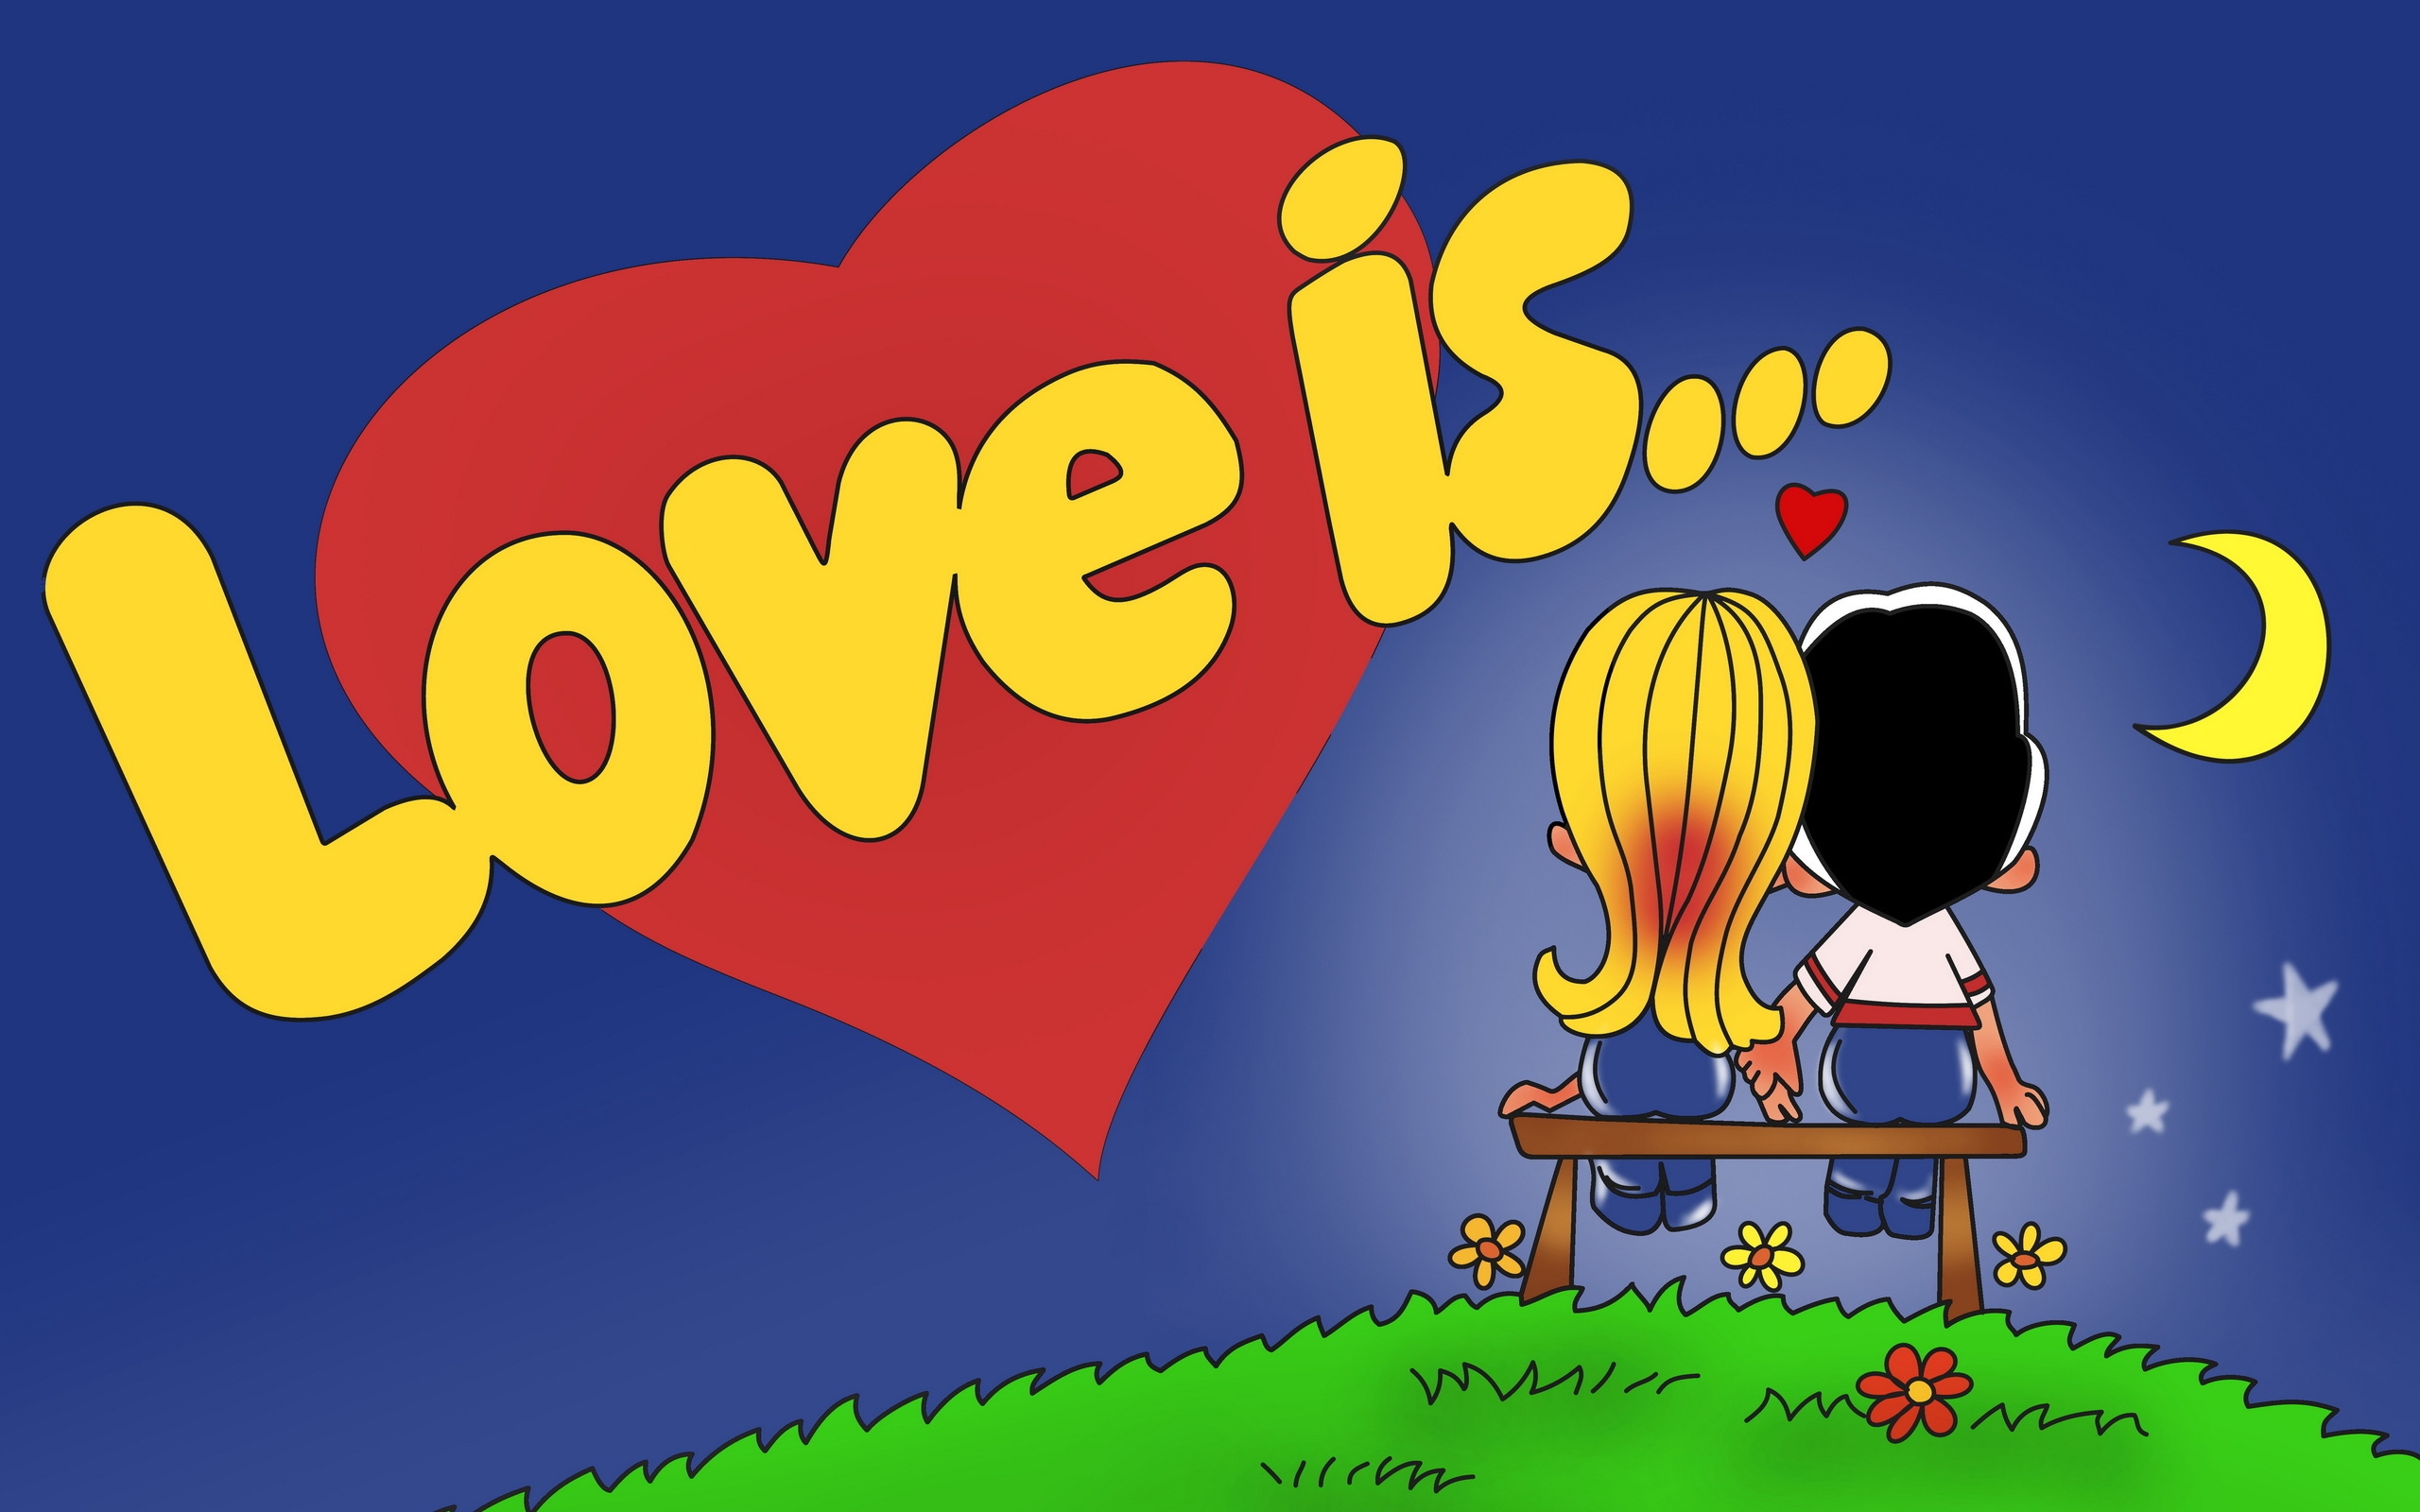 Love is for 2560 x 1600 widescreen resolution